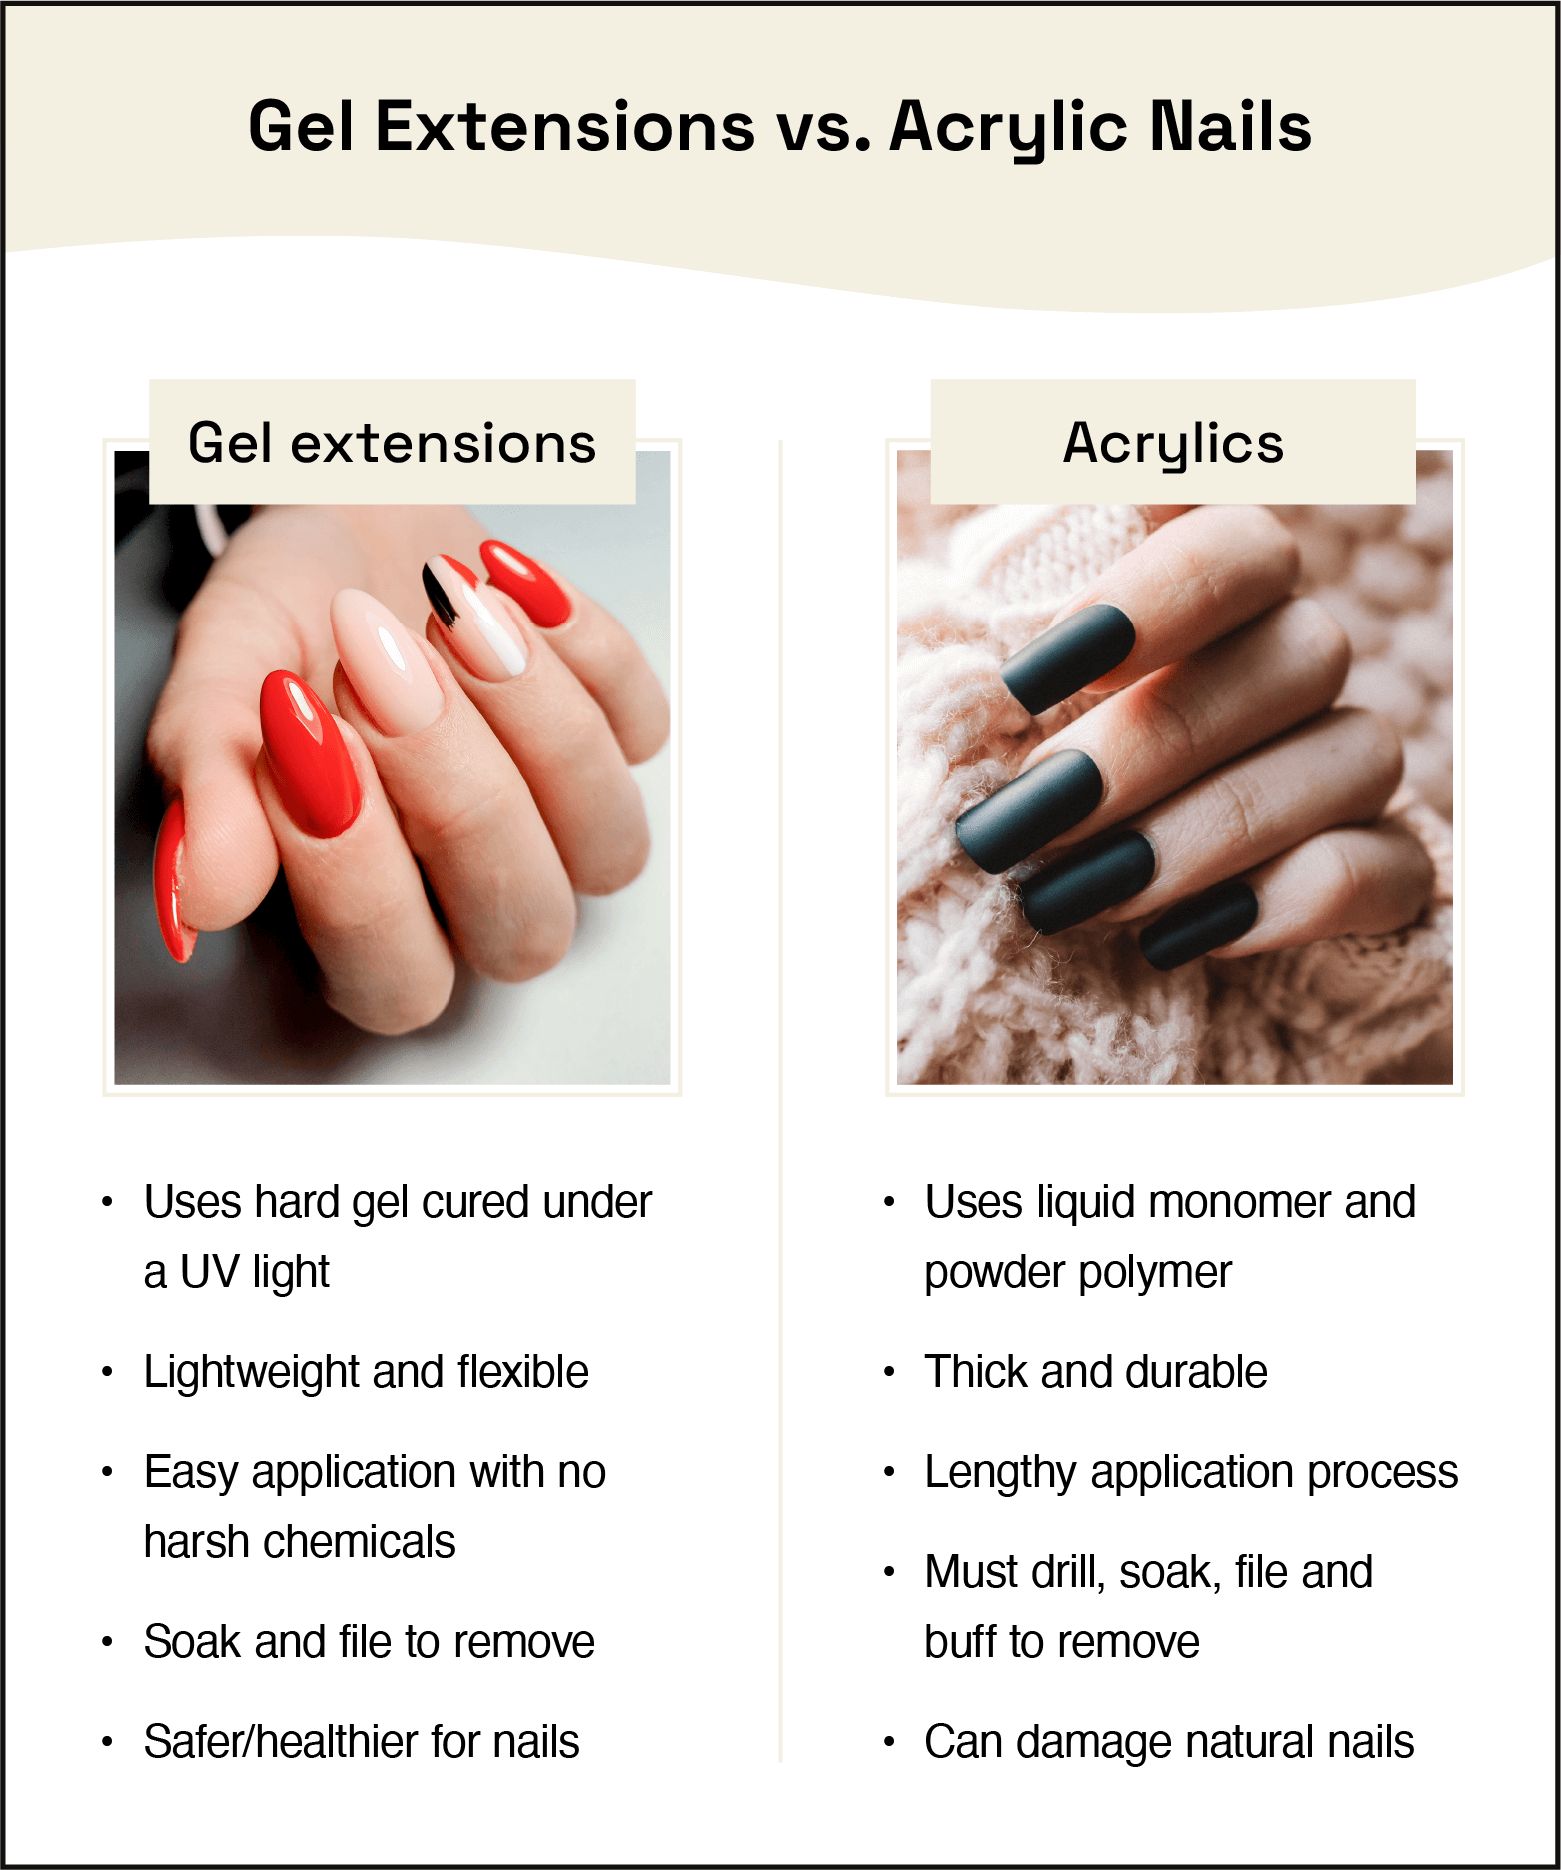 photo of gel extensions and acrylics with bulleted list explaining the main differences between each